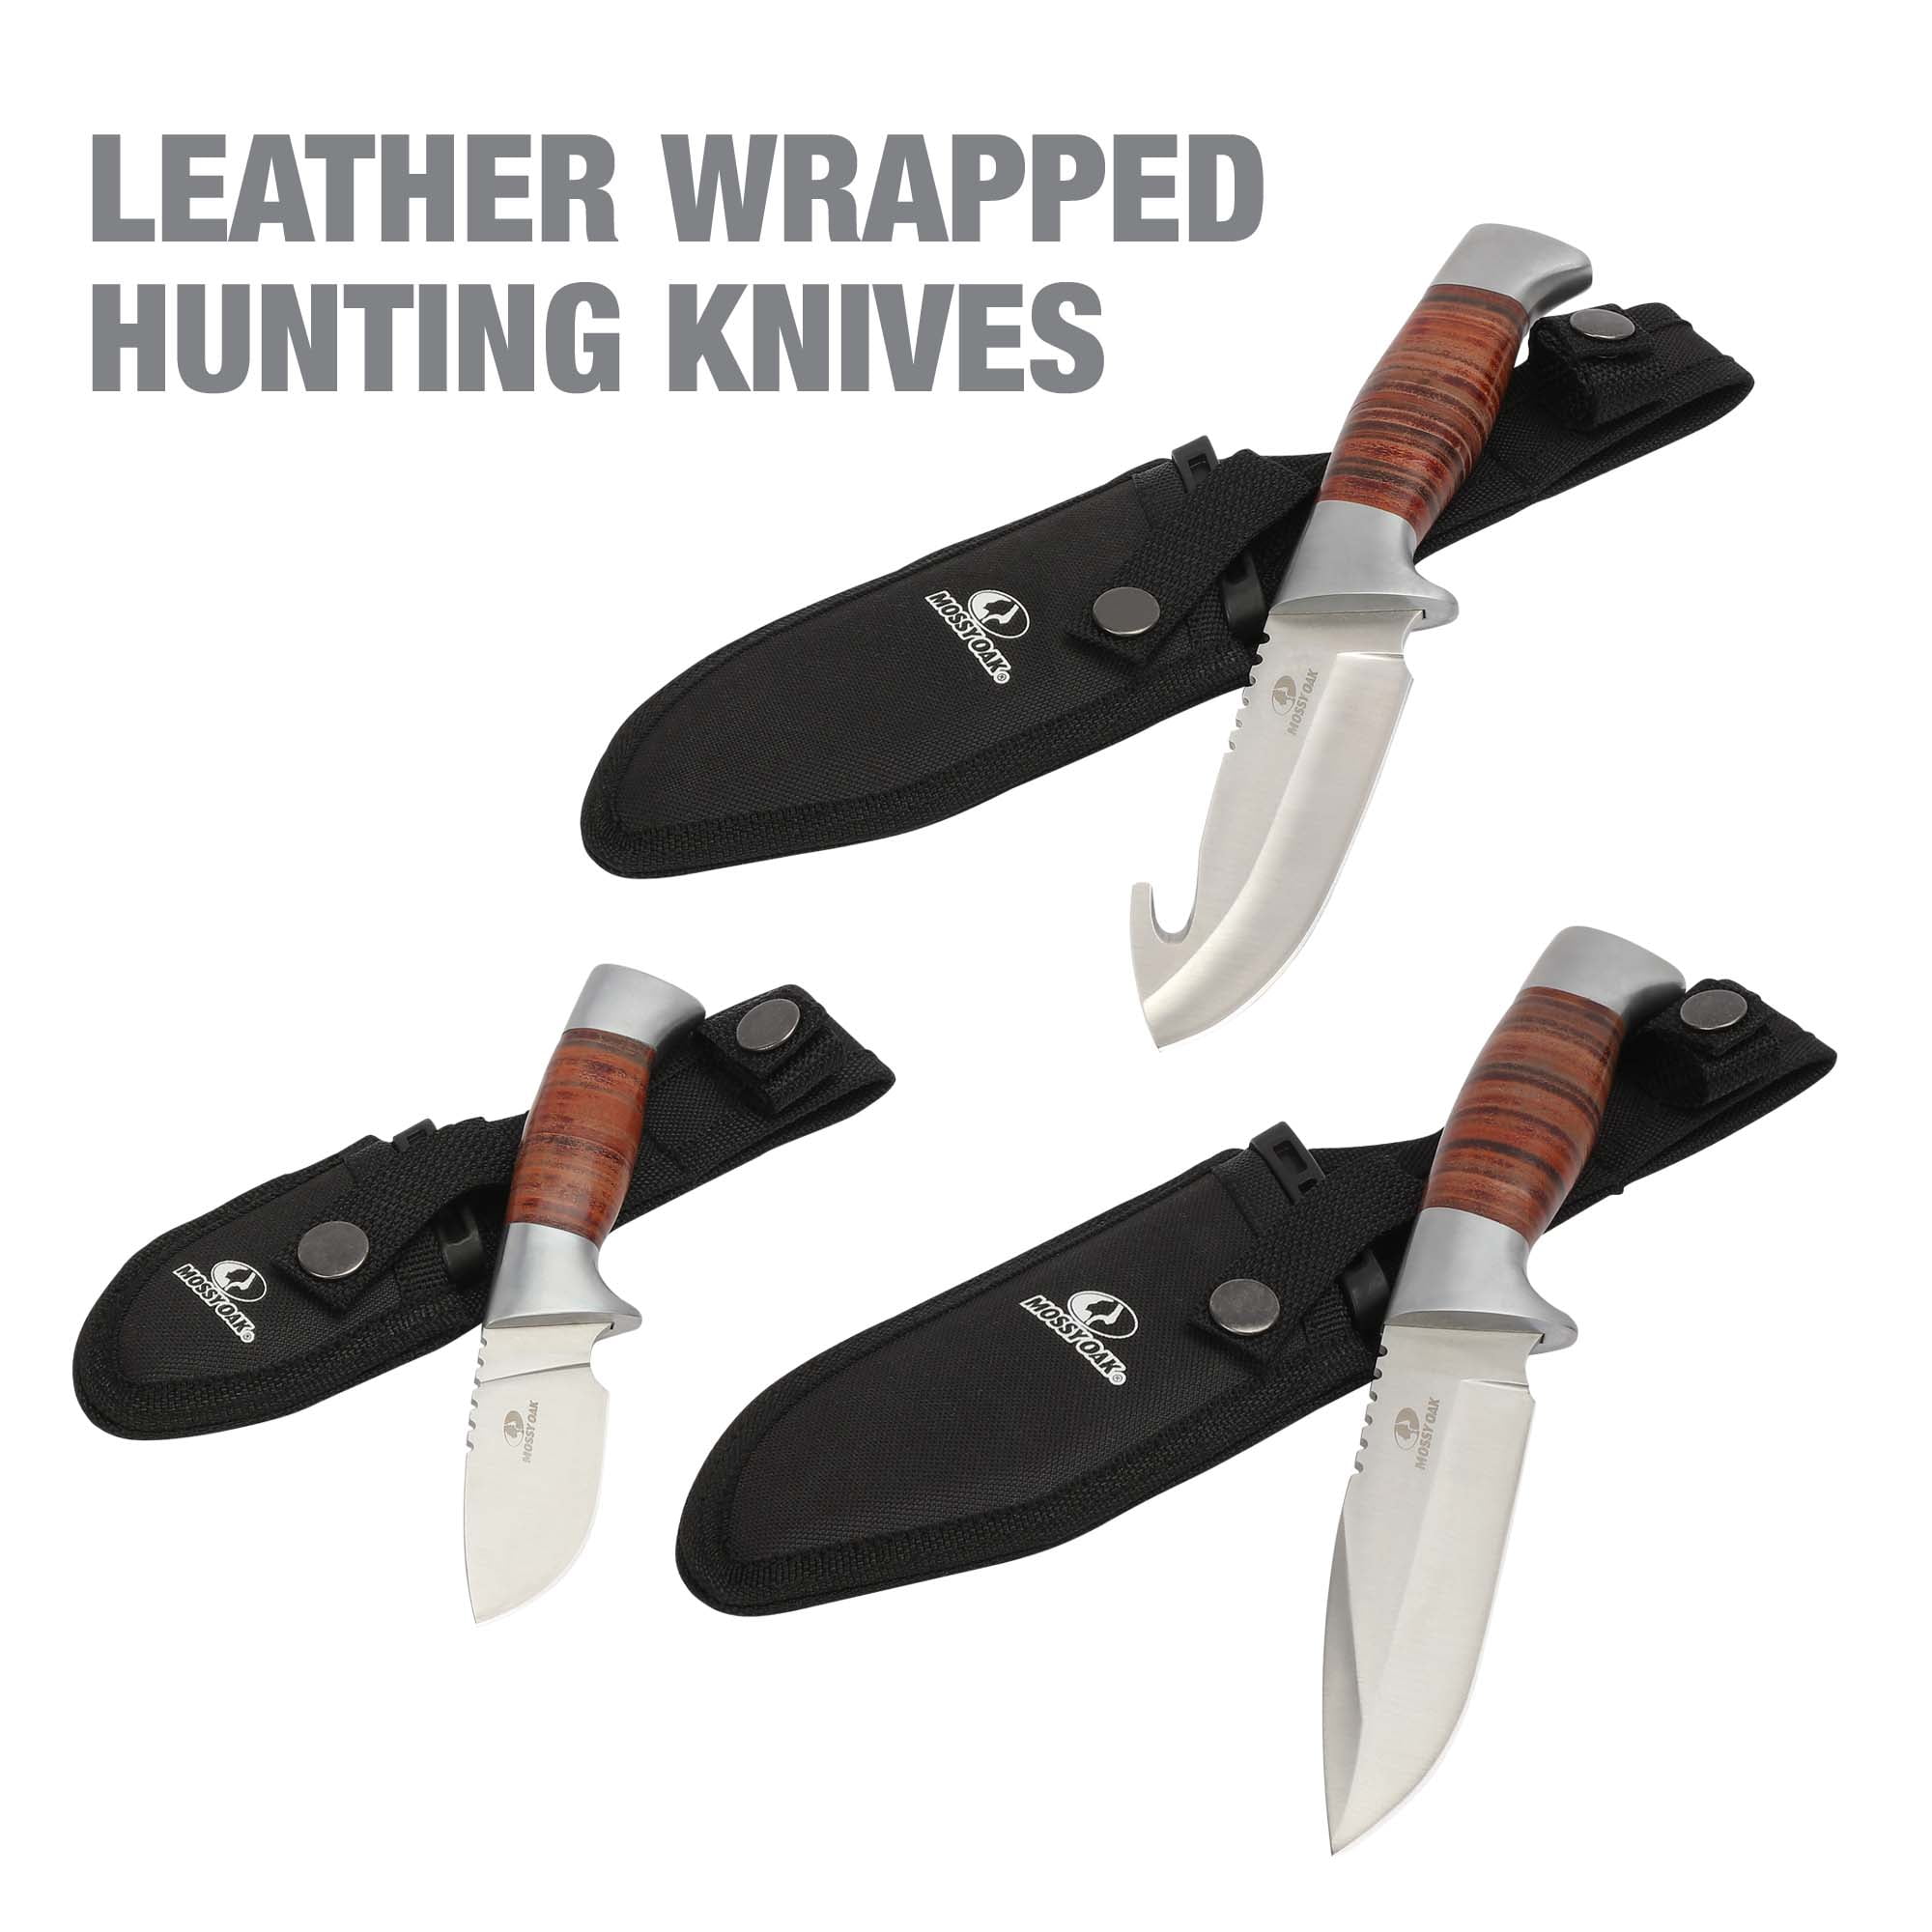 Mossy Oak 3-Pack Hunting Knives, Leather Wrapped with Sheath, 5" Stainless Steel Blade Length